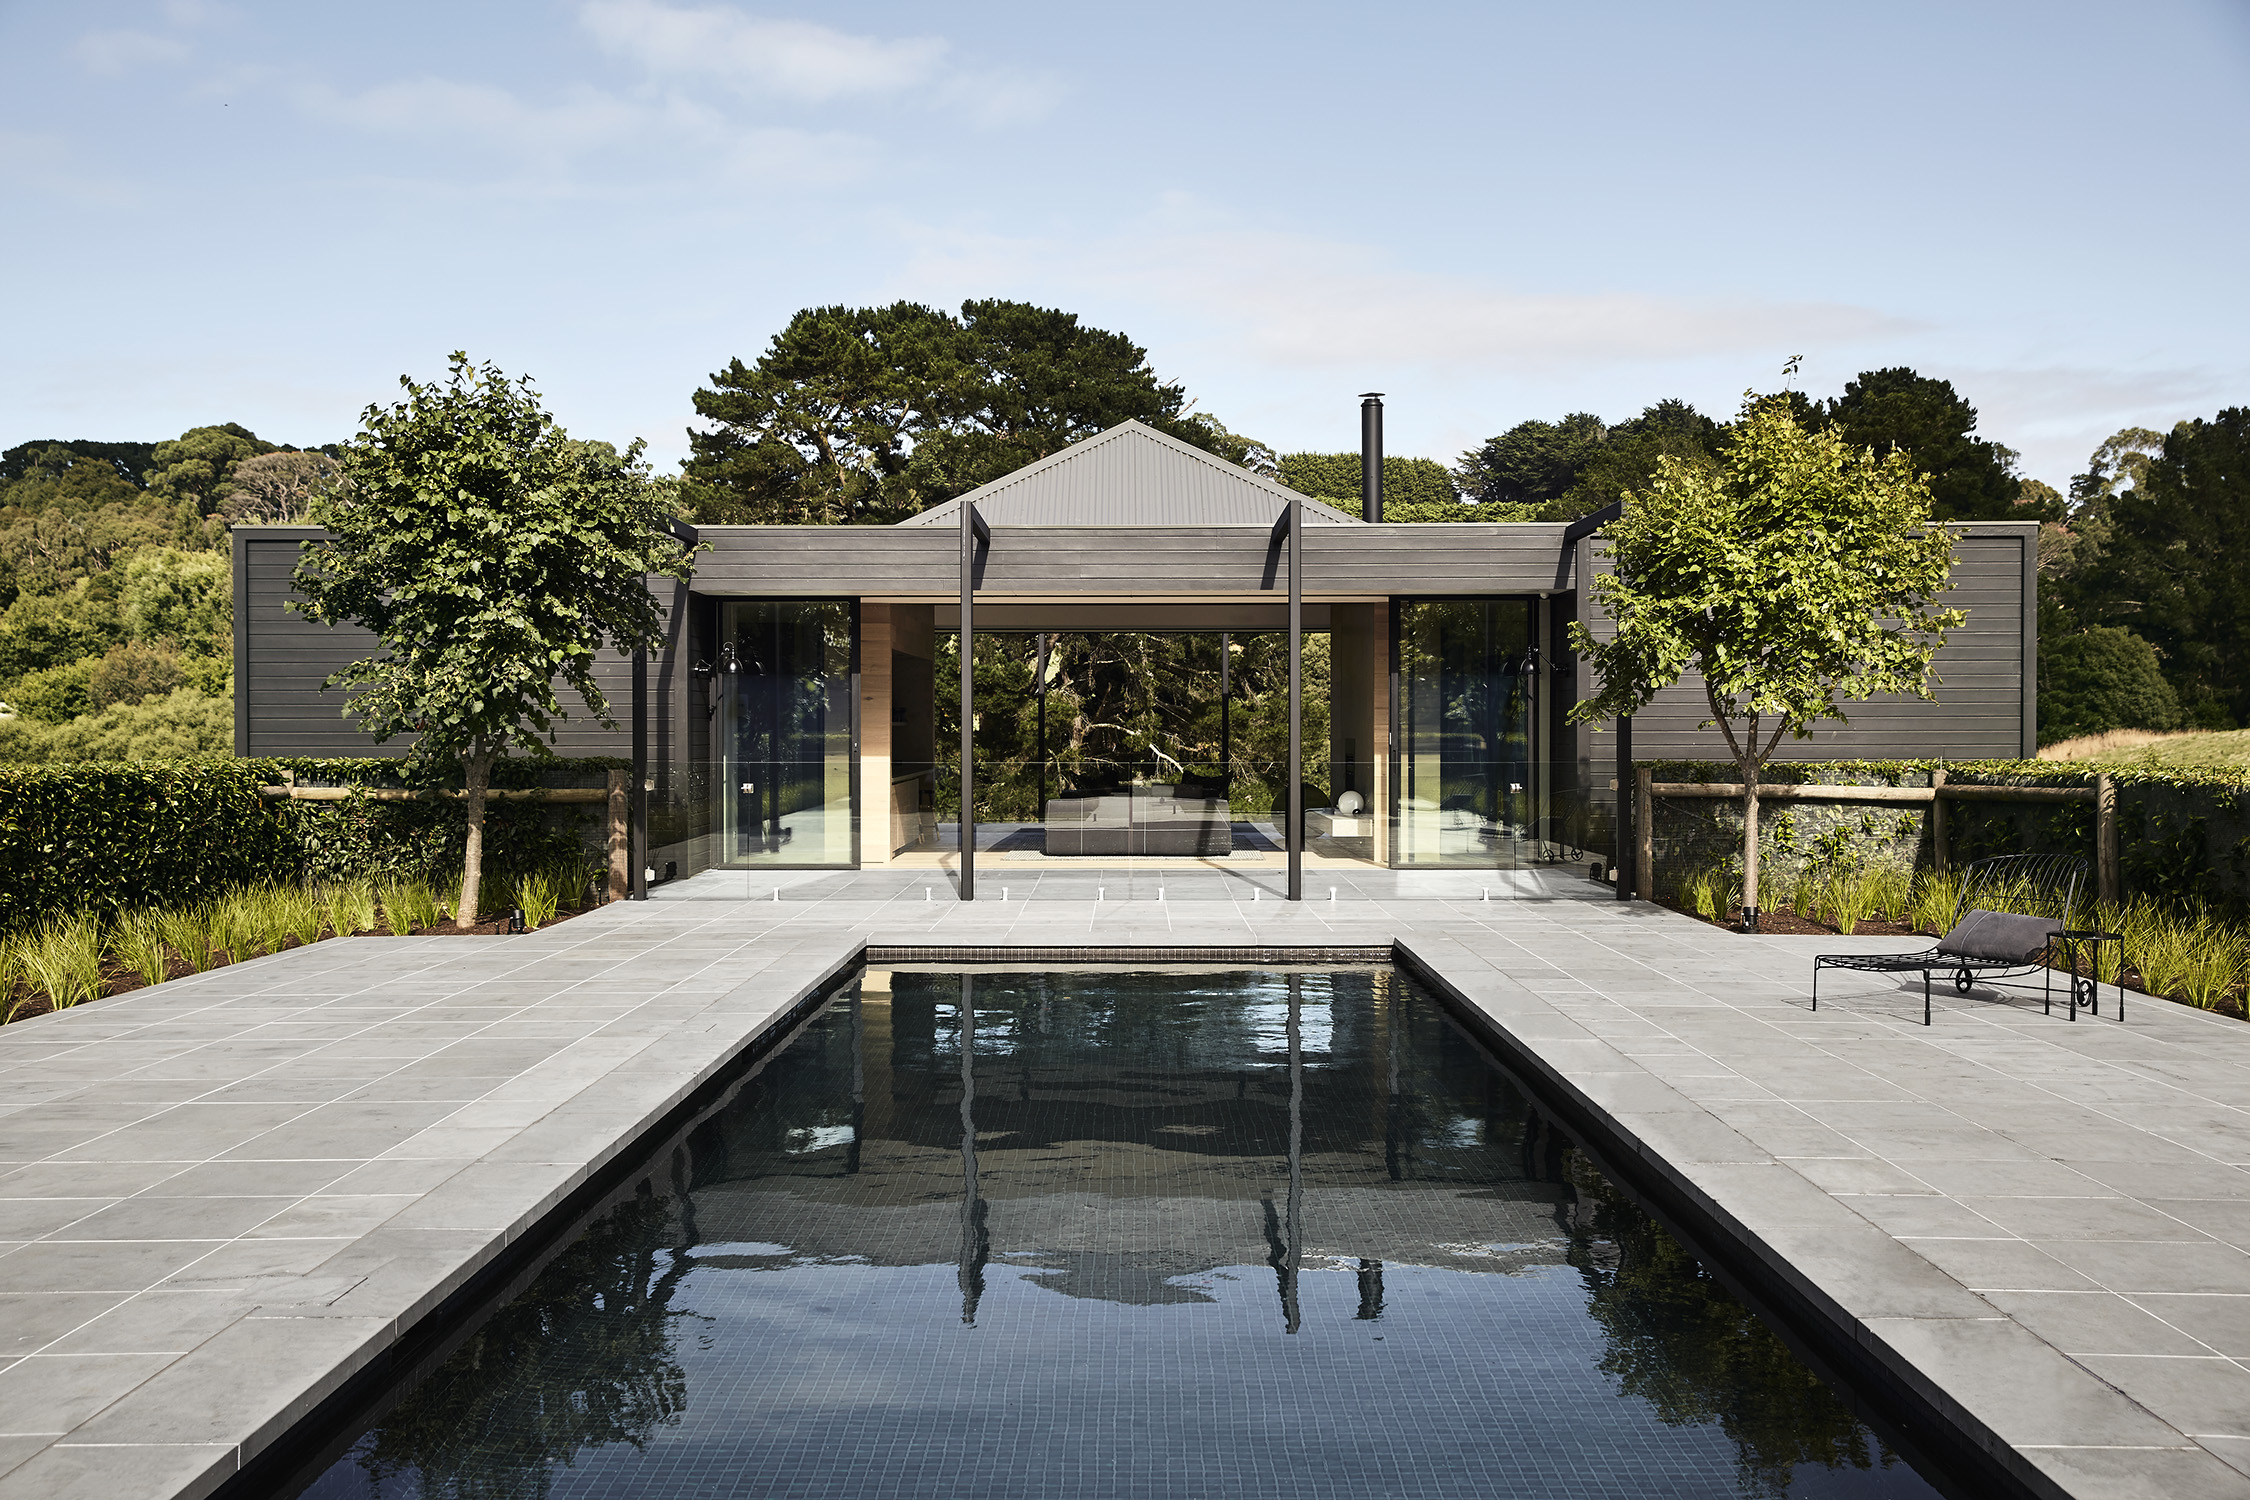 Pool Pavilion house by Russell Barrett Architects (1 of 4)